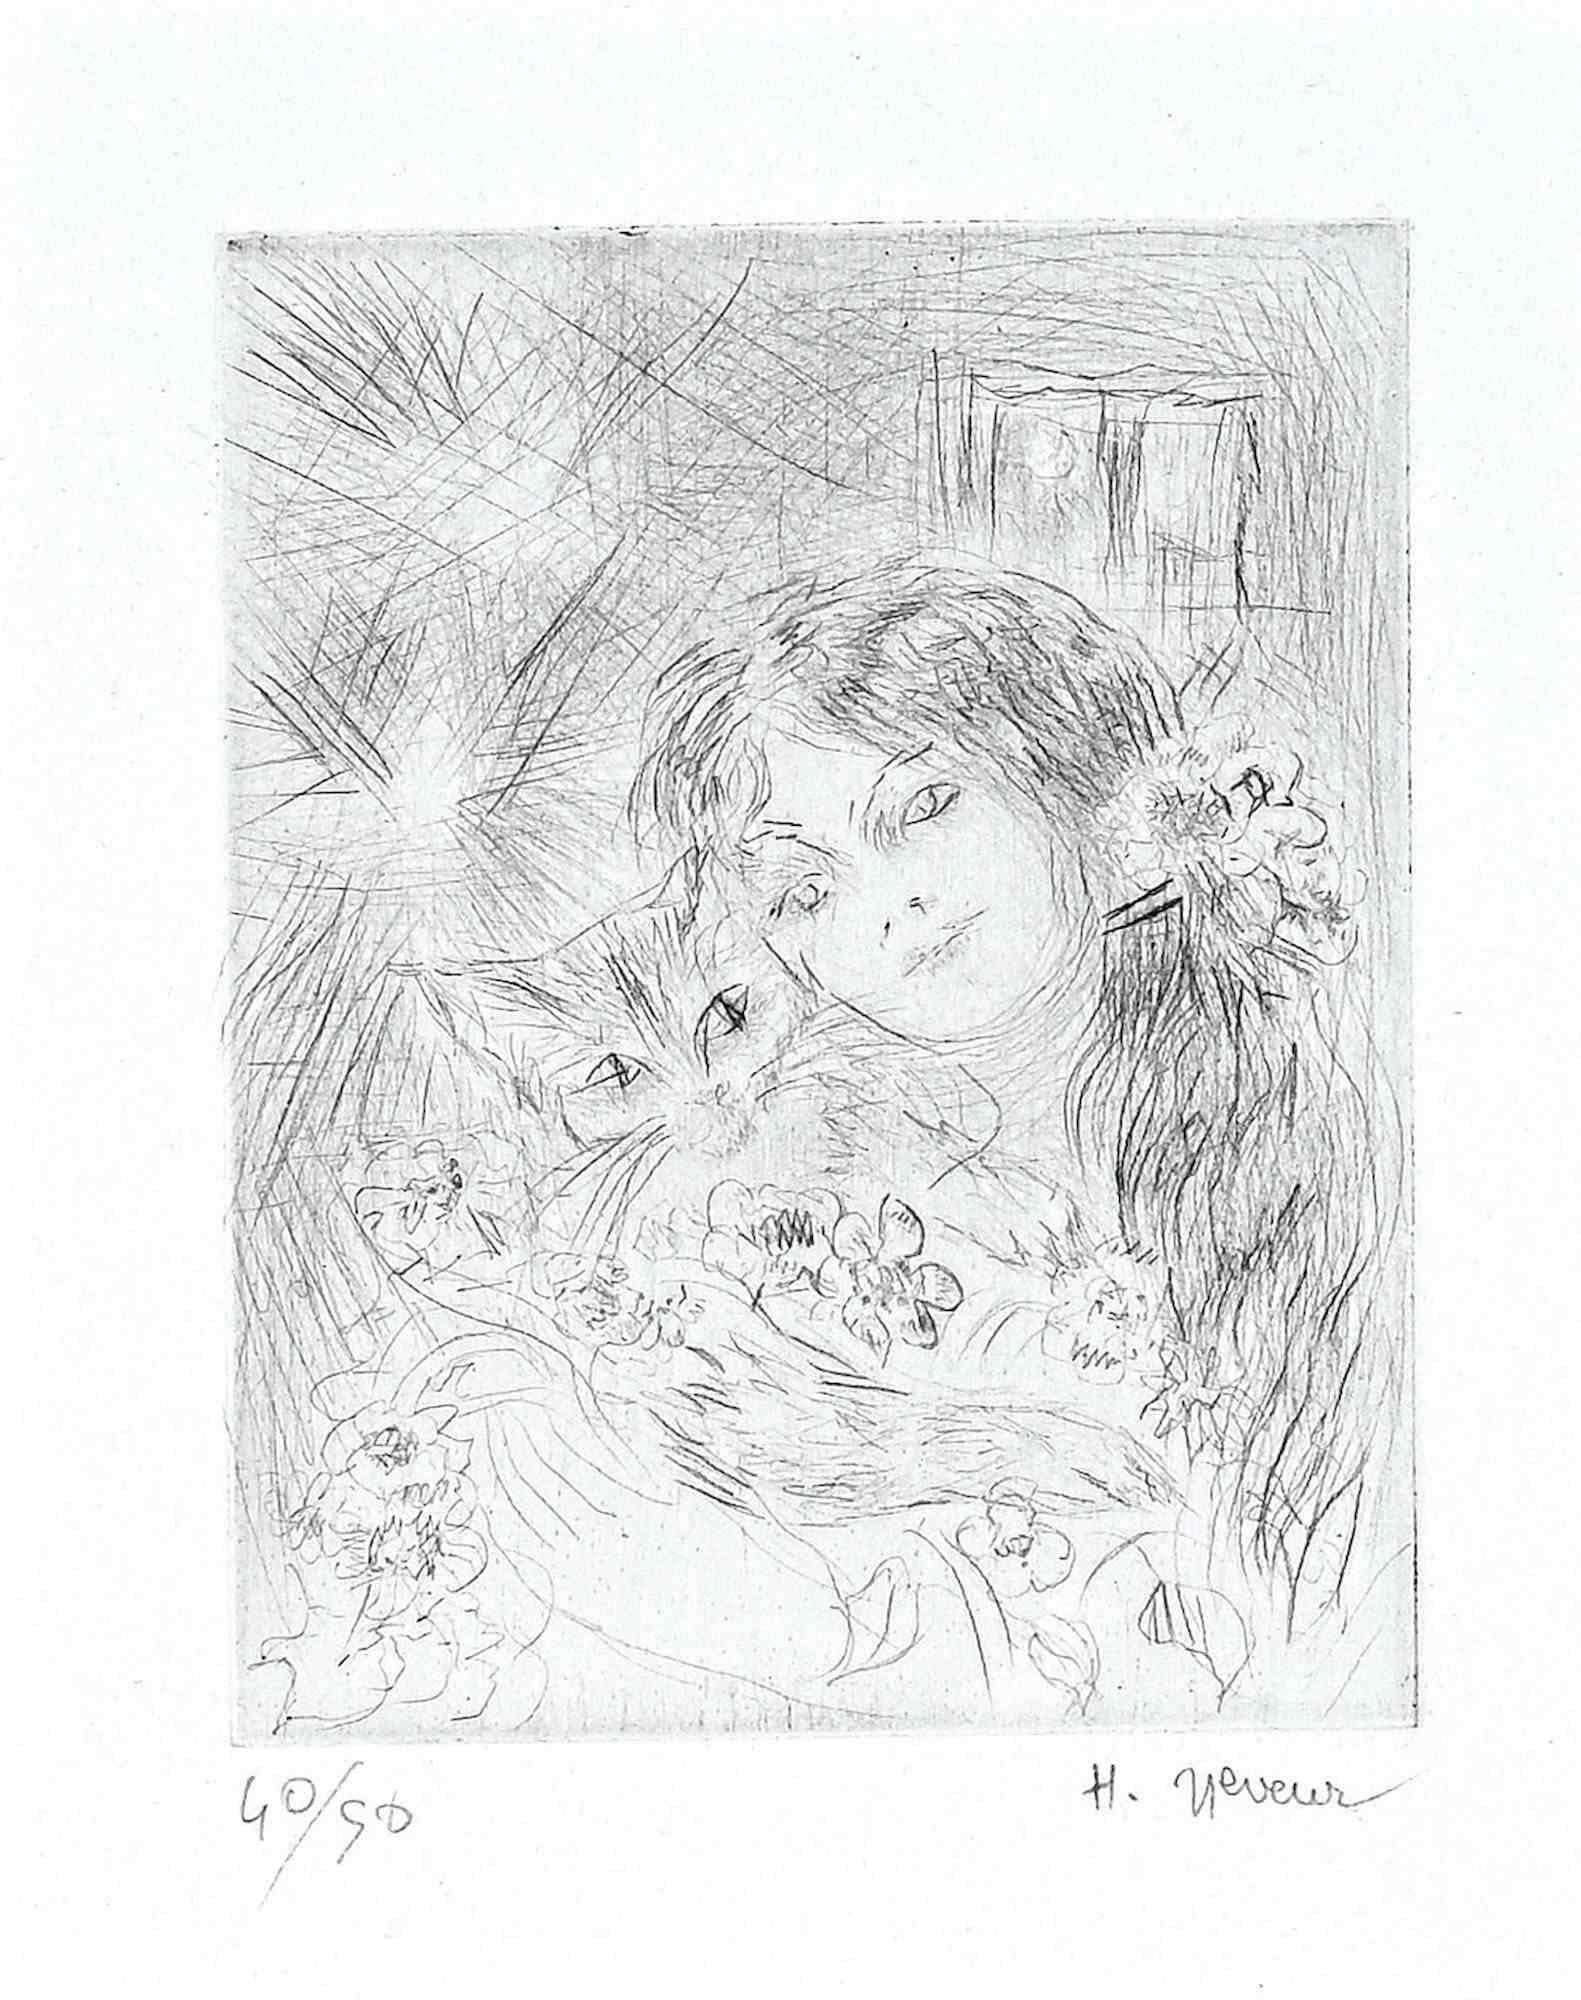 Portrait of Young Lady with Cat - Original Print by Helène Neveur - 1970s